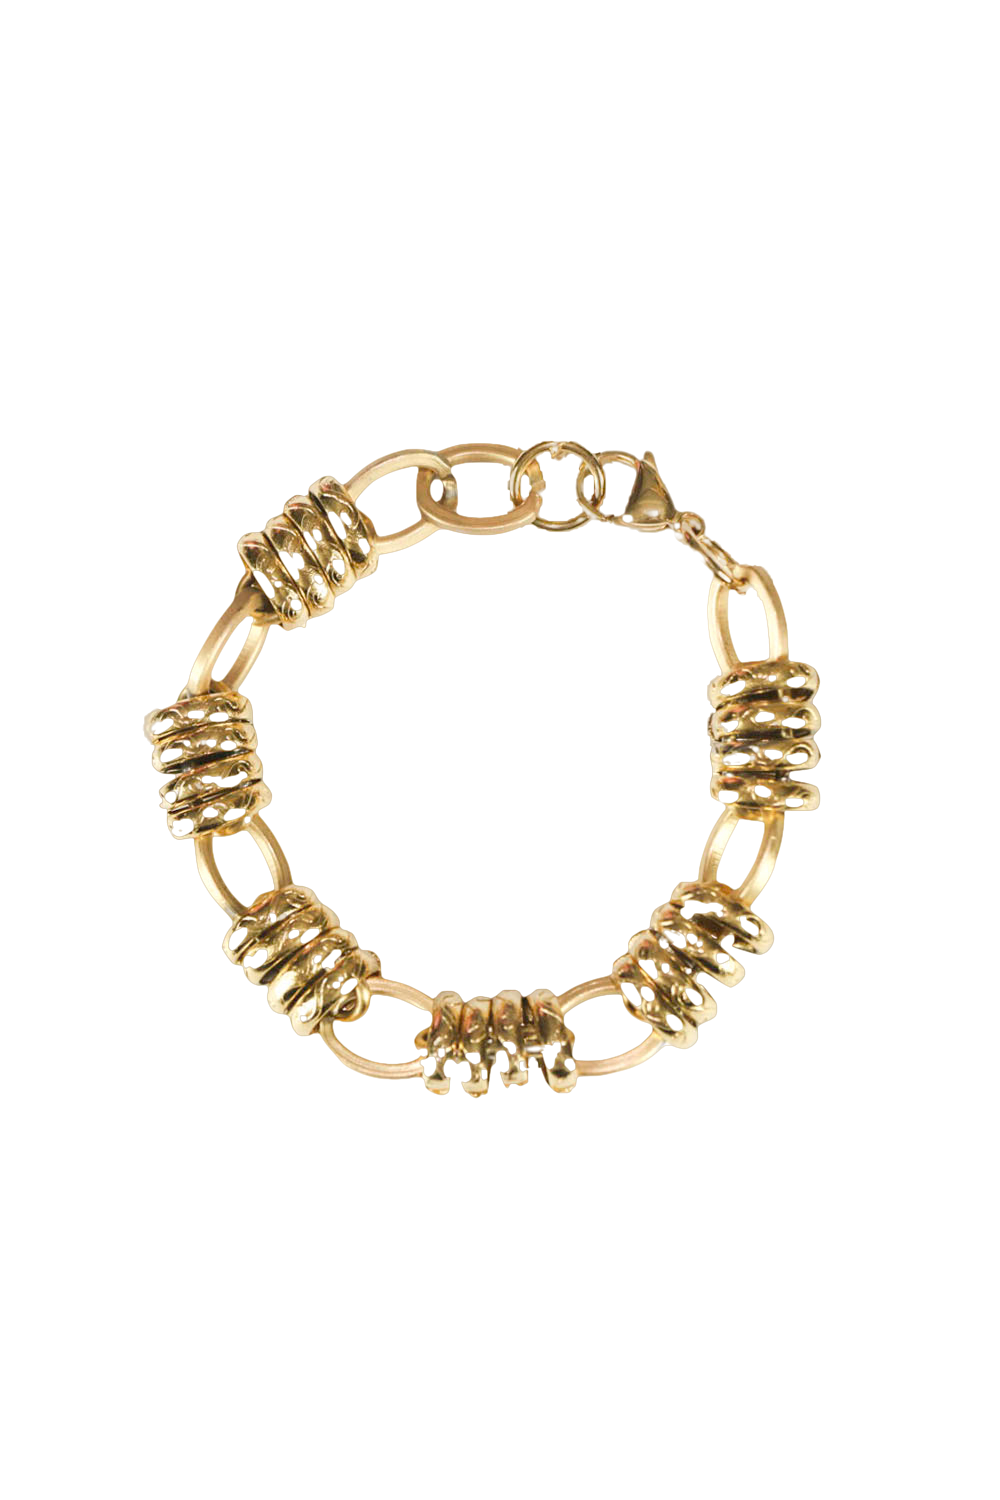 Shop Alice Gold Bracelet from THE GALA at Seezona | Seezona